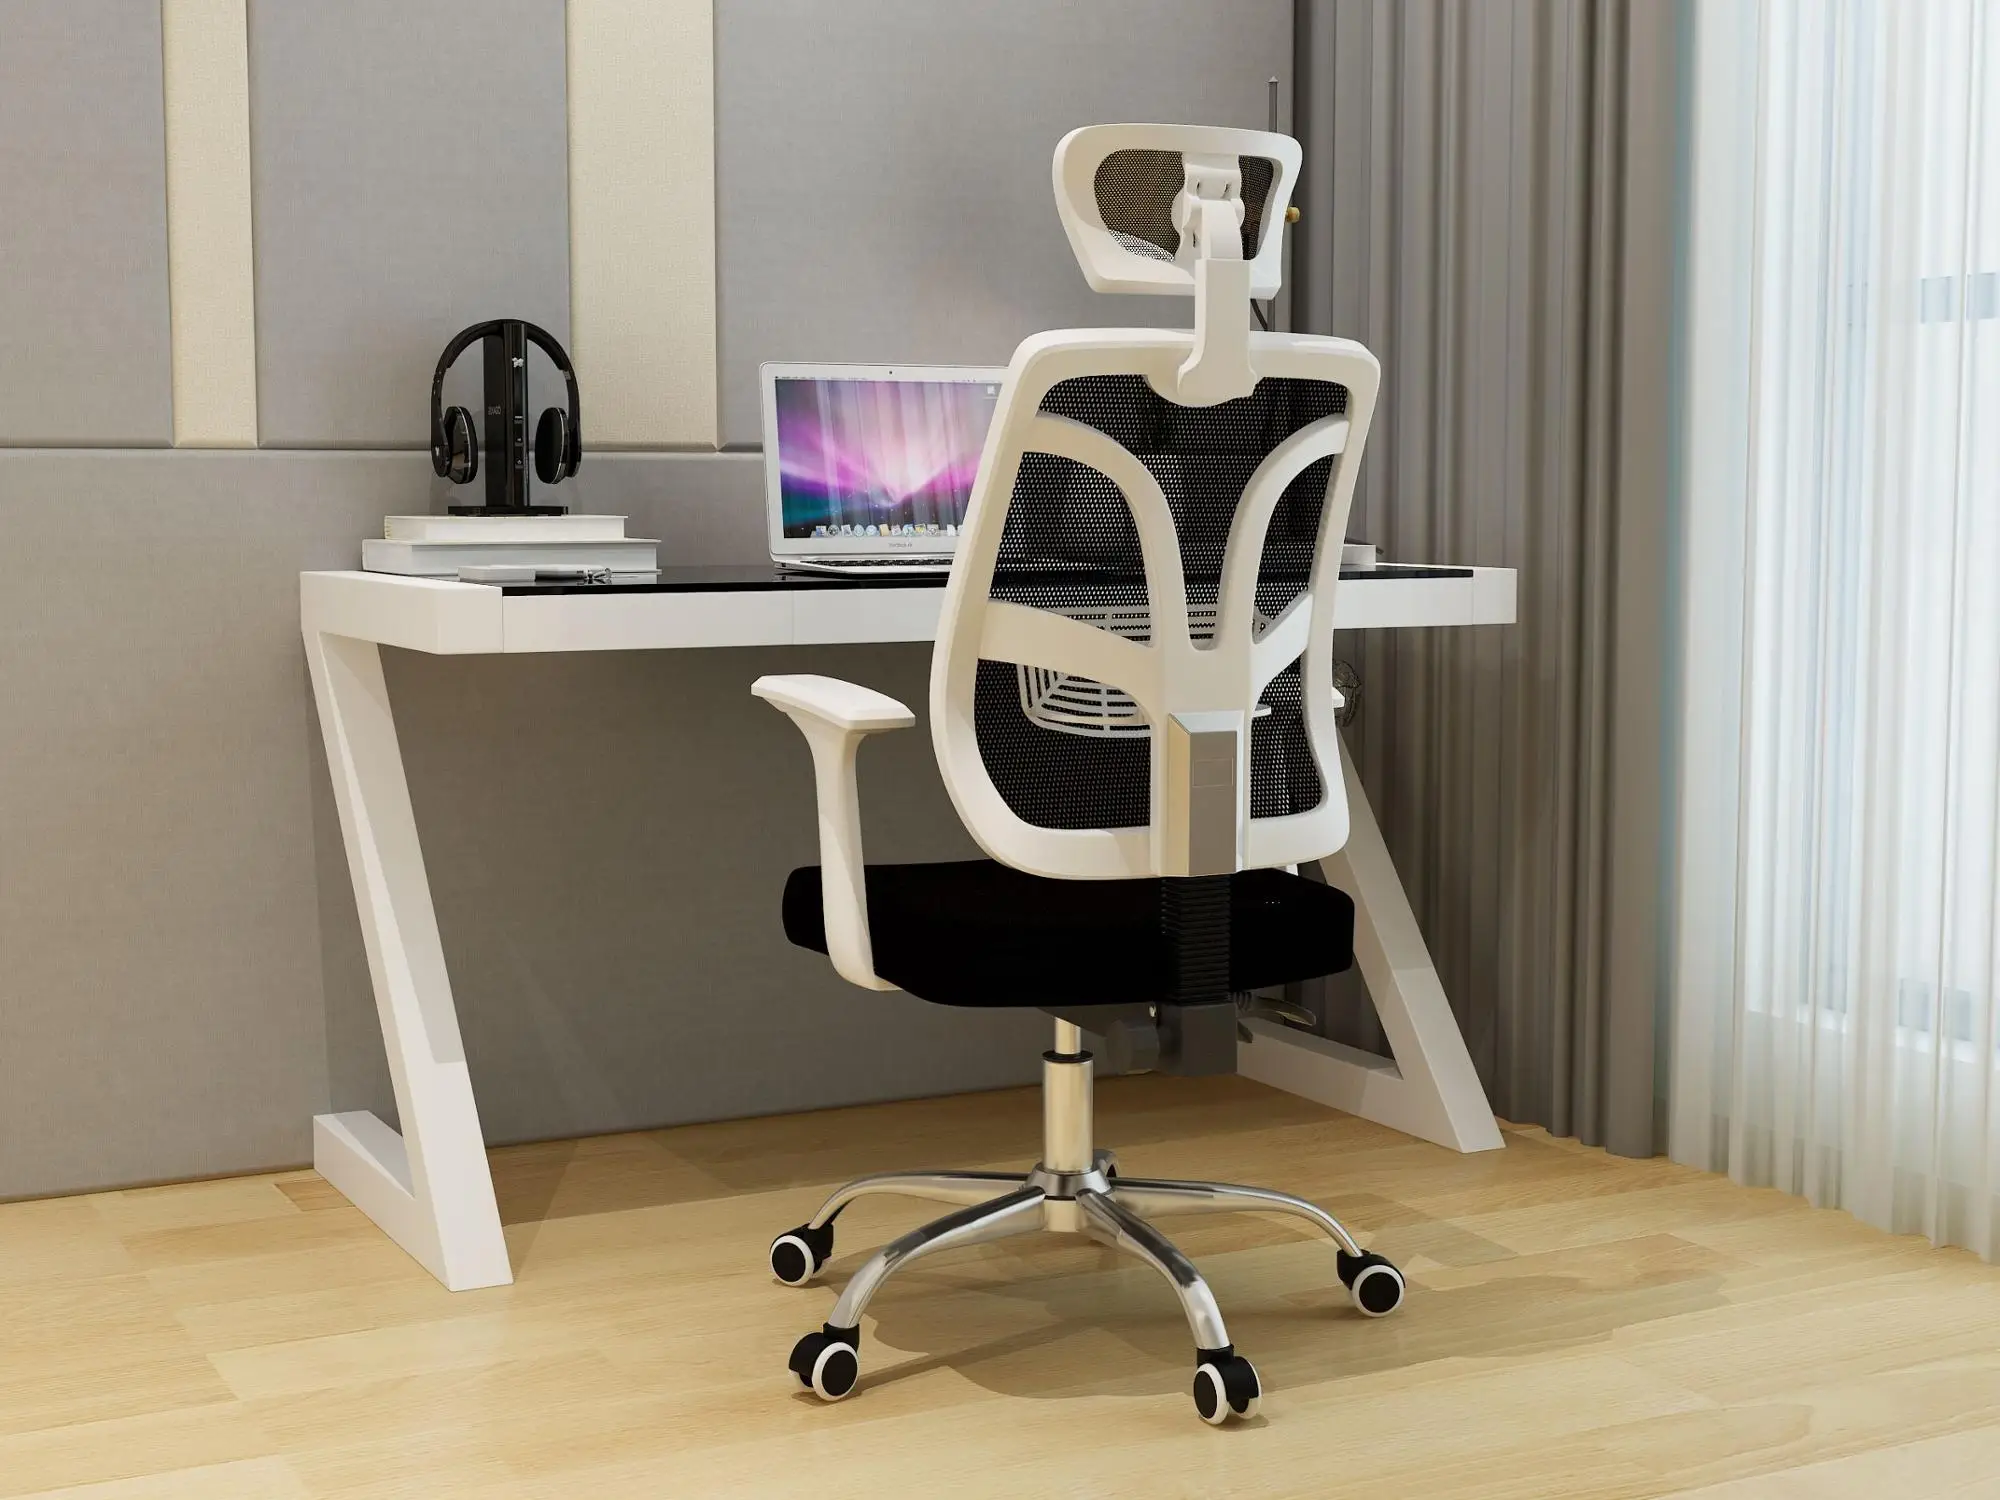 Commercial Furniture Genneral Use High-tech Office Chairs Adjustable ...